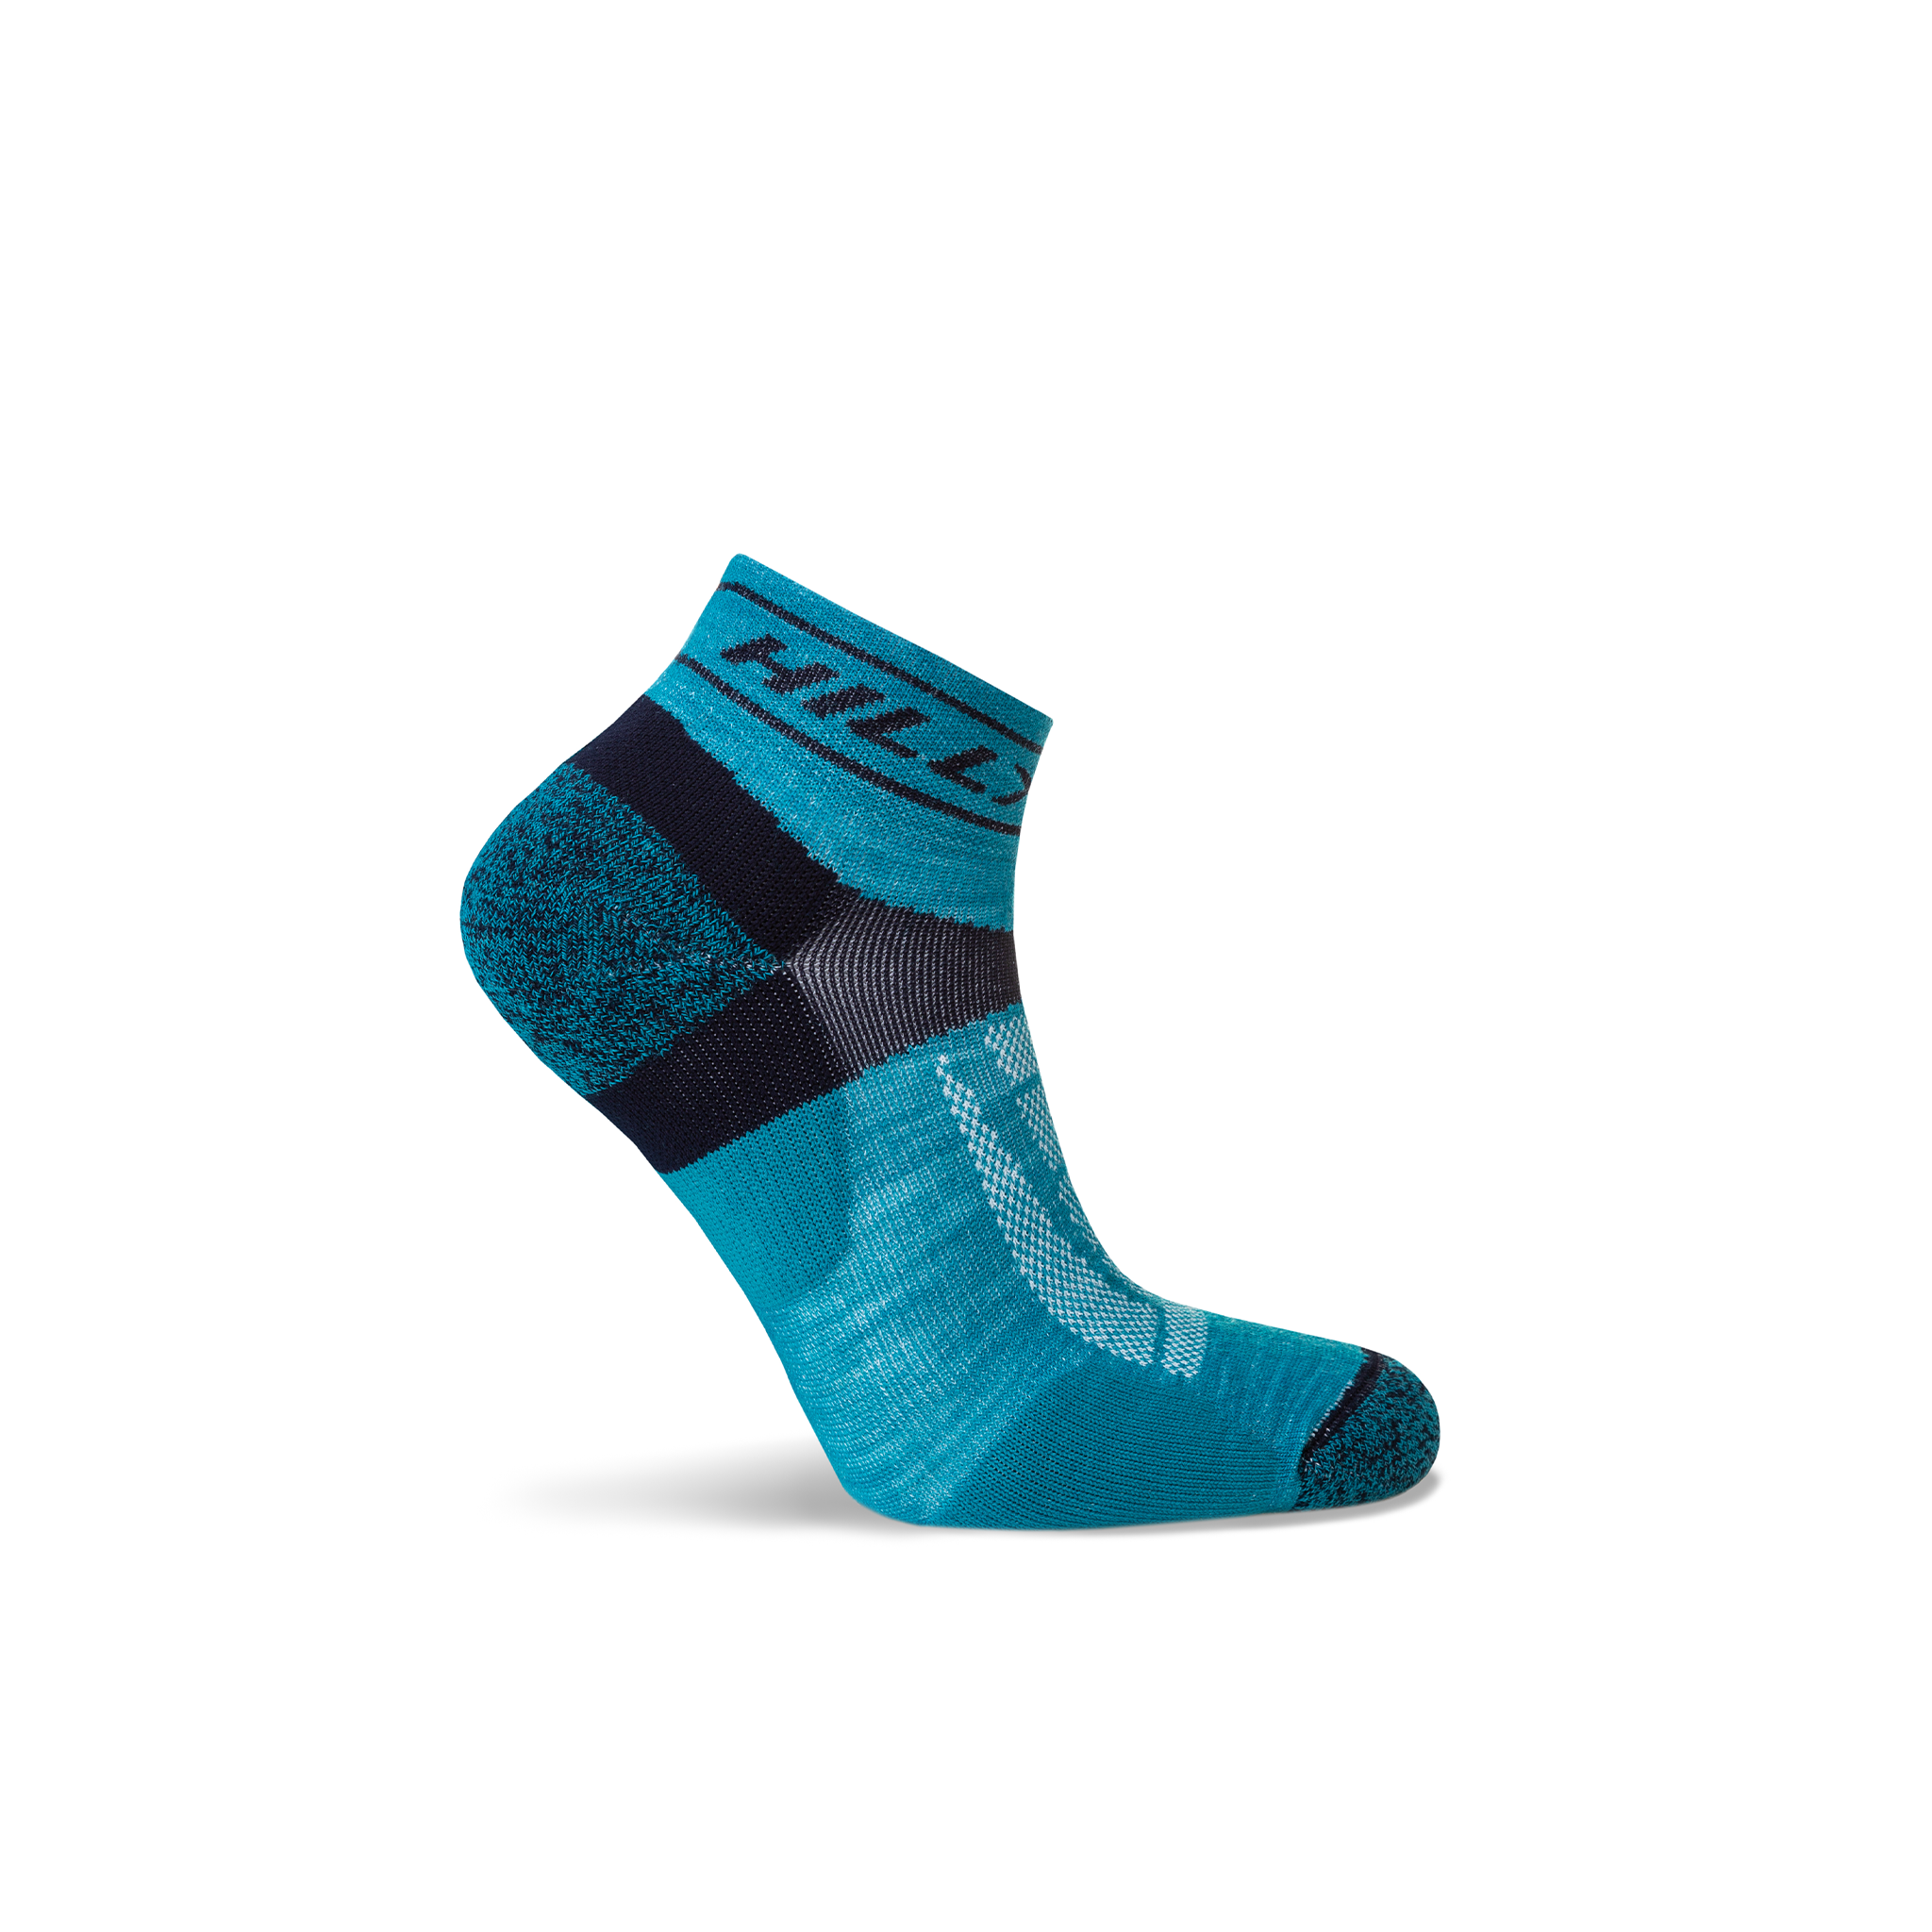 Hilly Trail Quarter - Turquoise/Navy